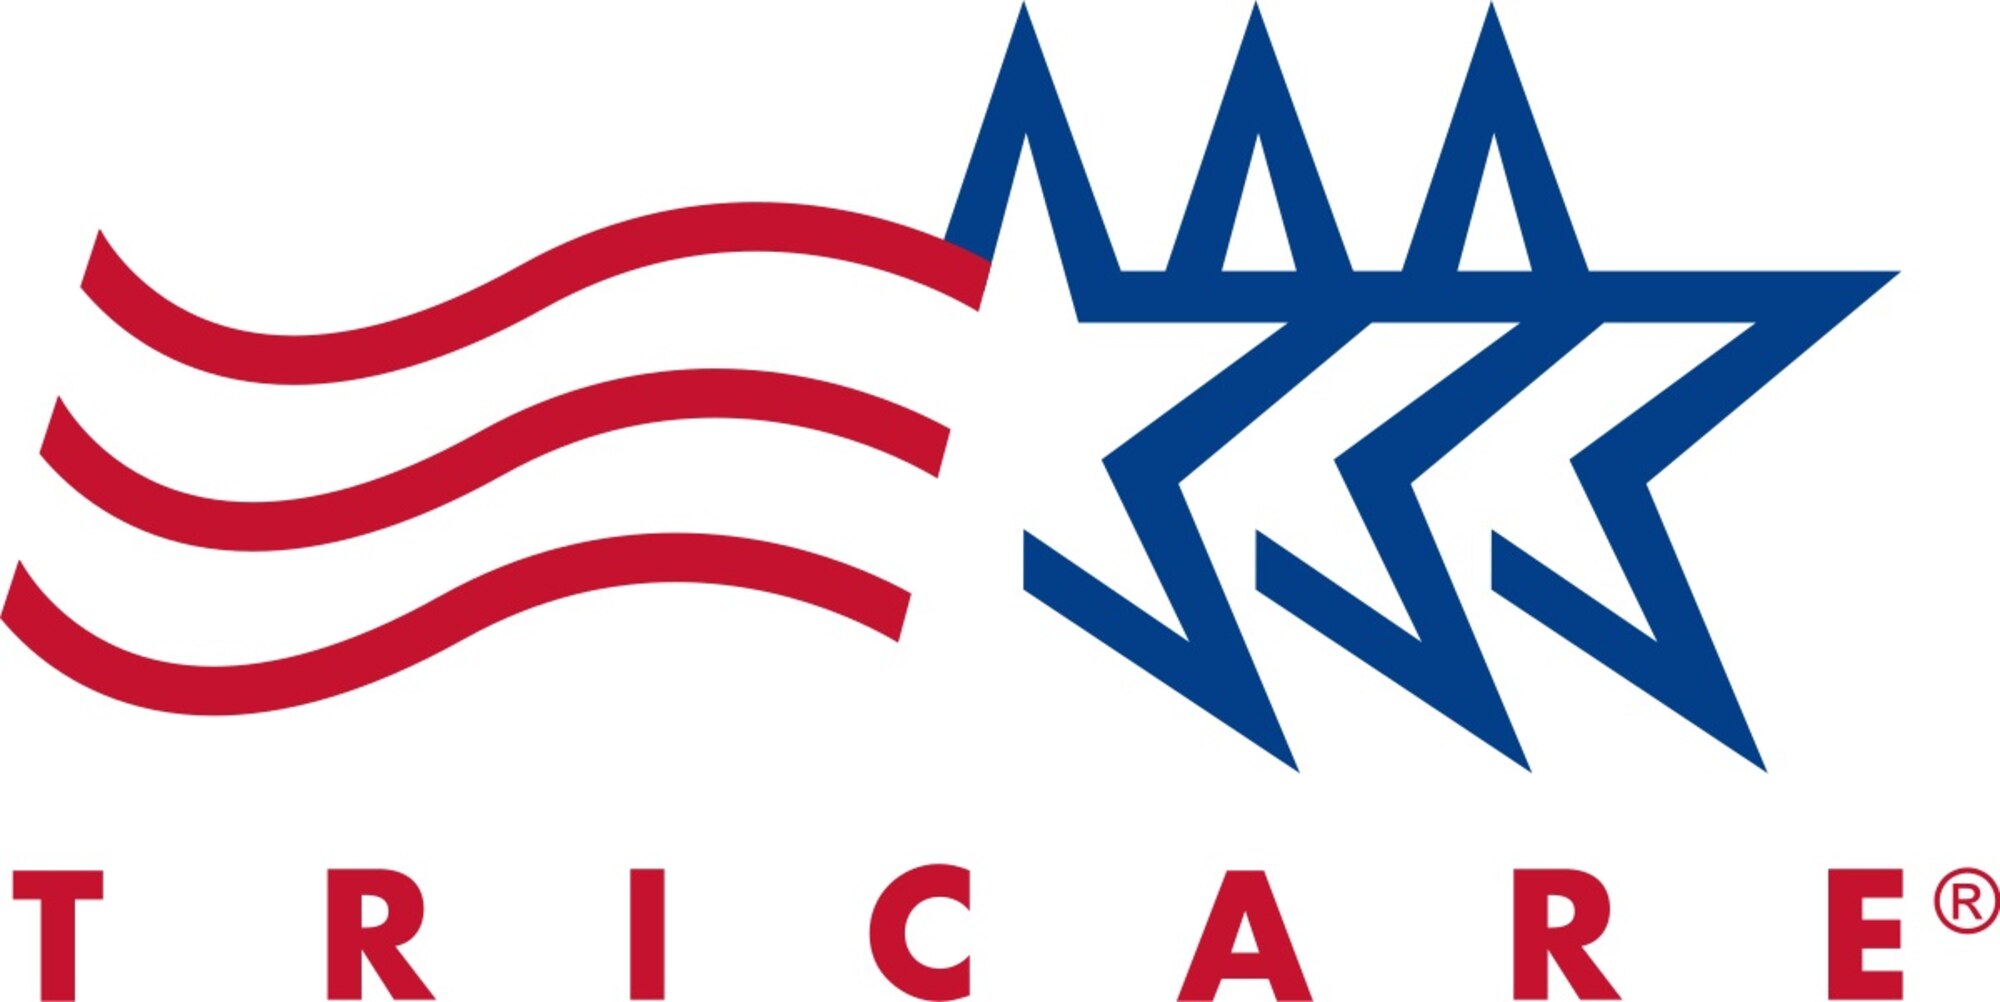 With the 2020 TRICARE Open Season coming soon, now is the time to start thinking about your and your family’s health care needs.